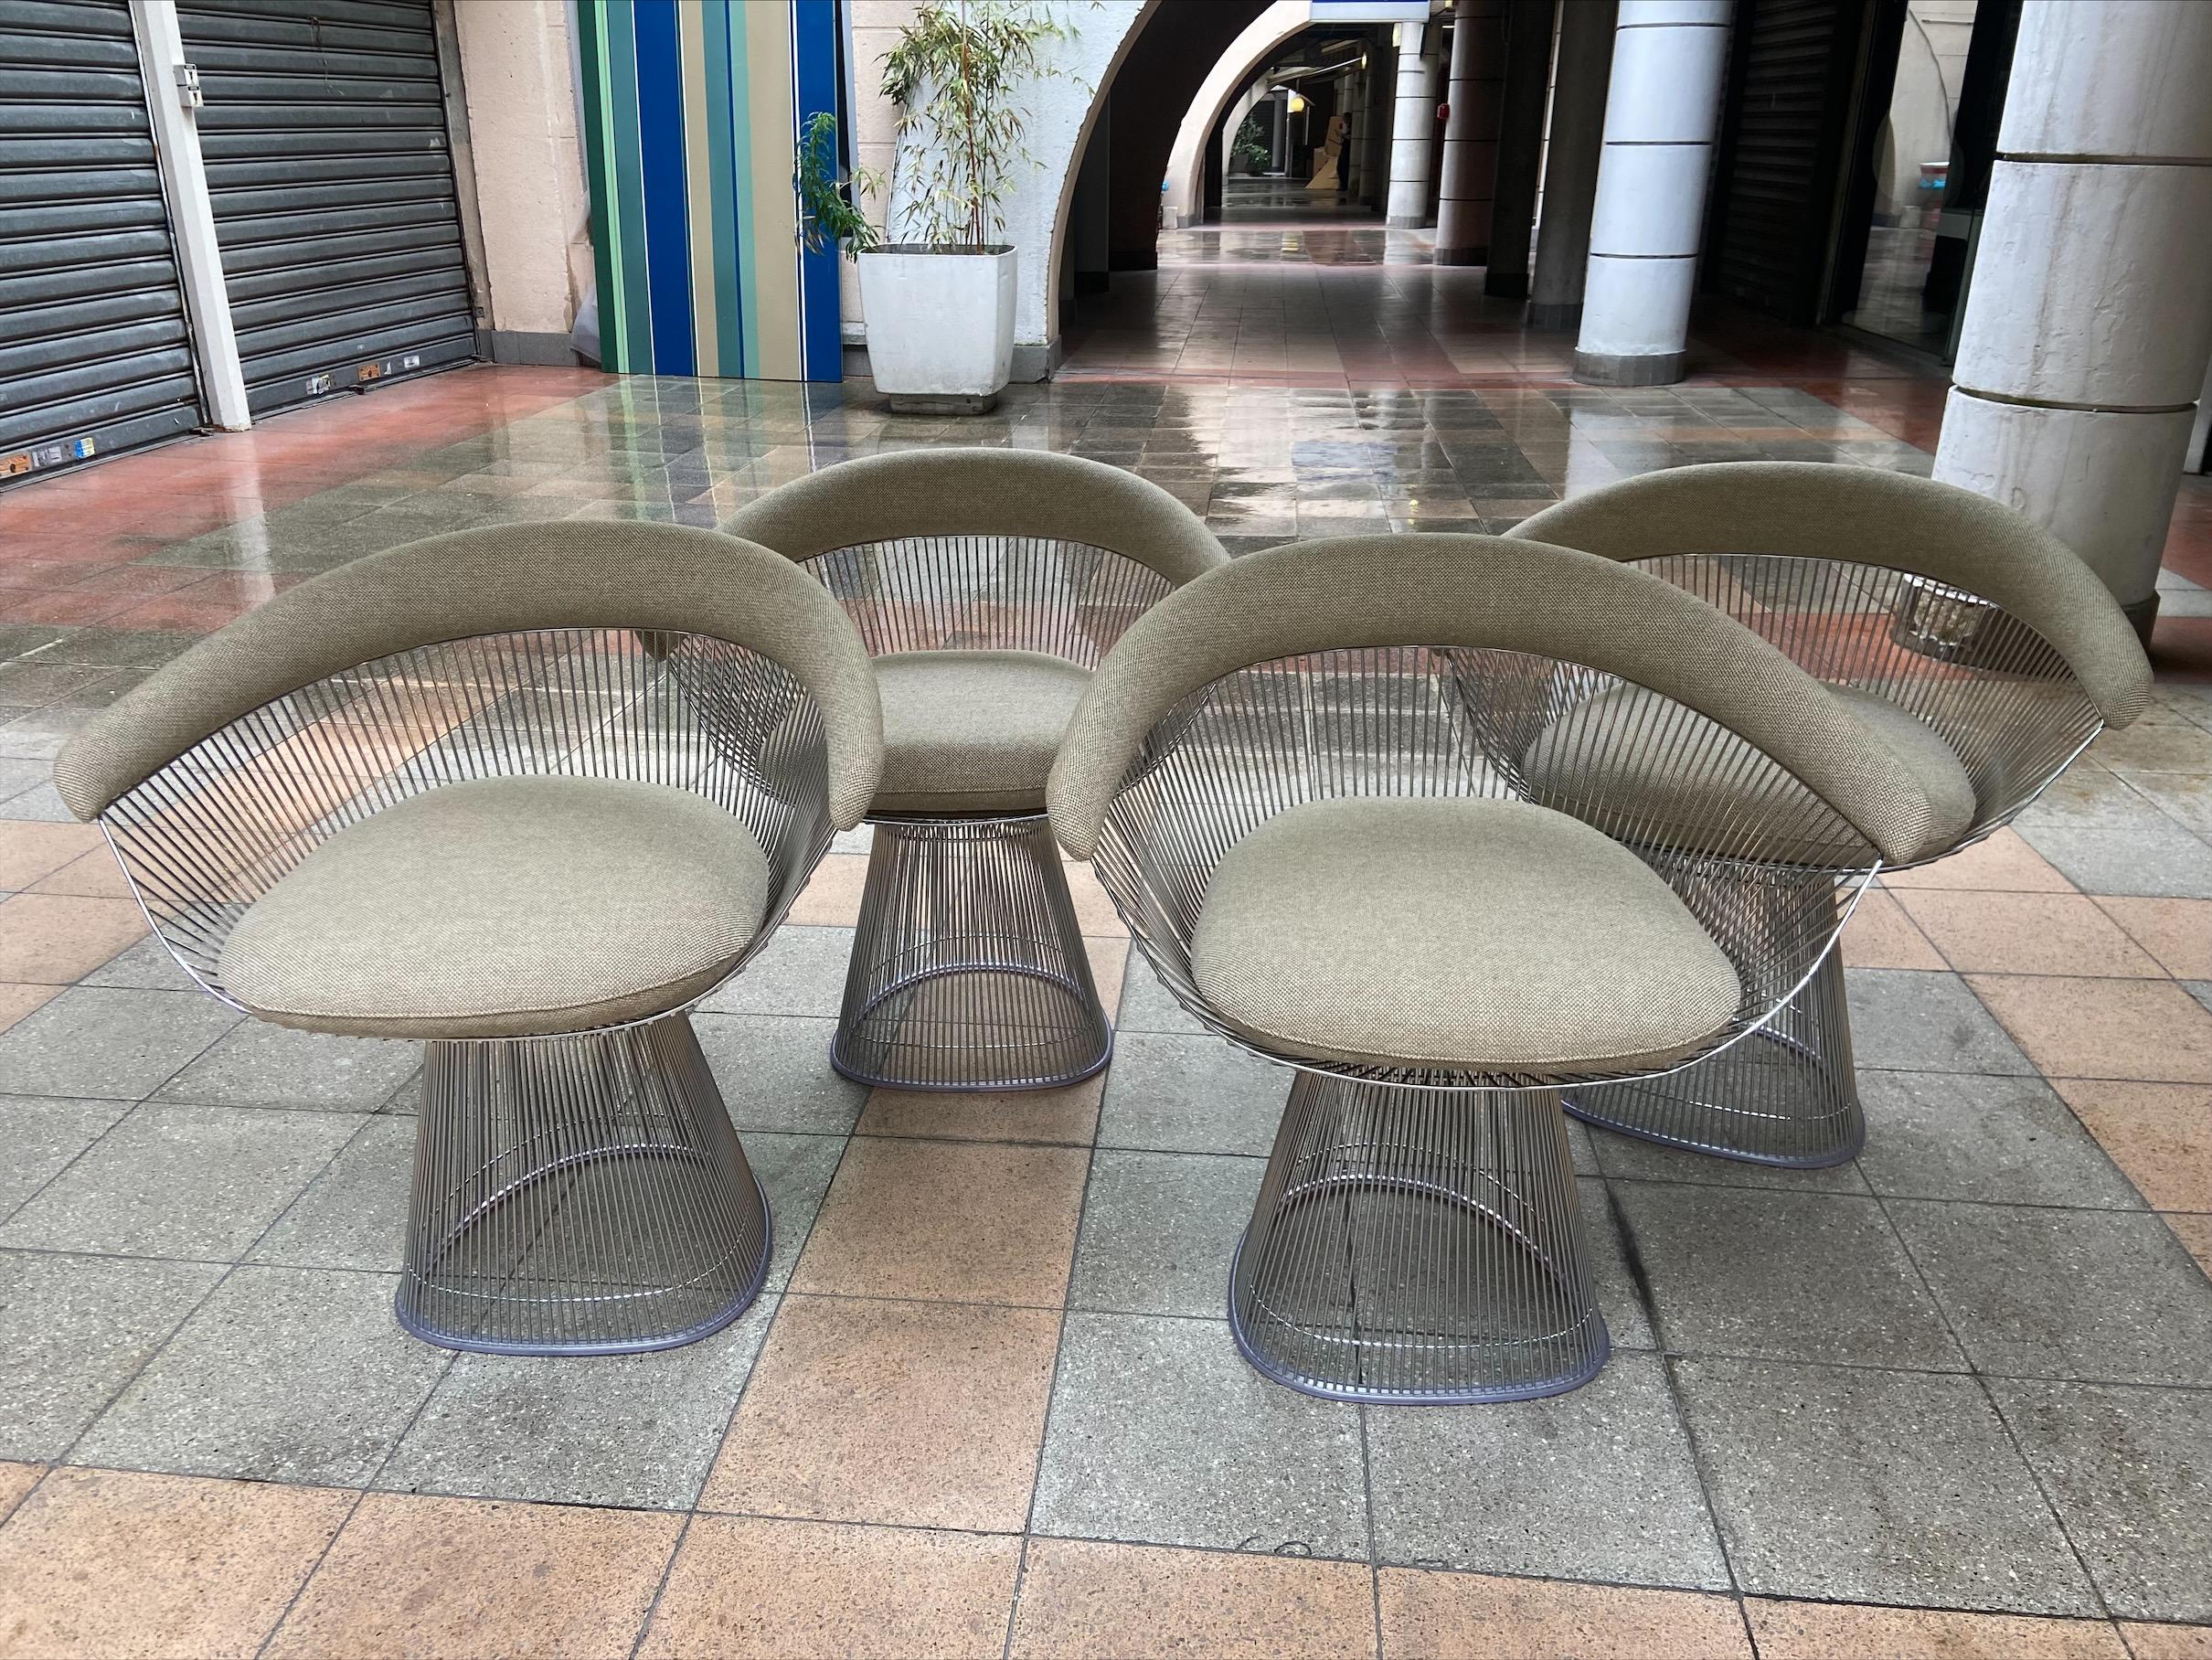 4 chairs - Warren Platner
Knoll Edition
Kvadrat mottled beige and nickel-plated metal
H76 x W73 x D57 cm
2021 - New
(sold new on average €14,000)